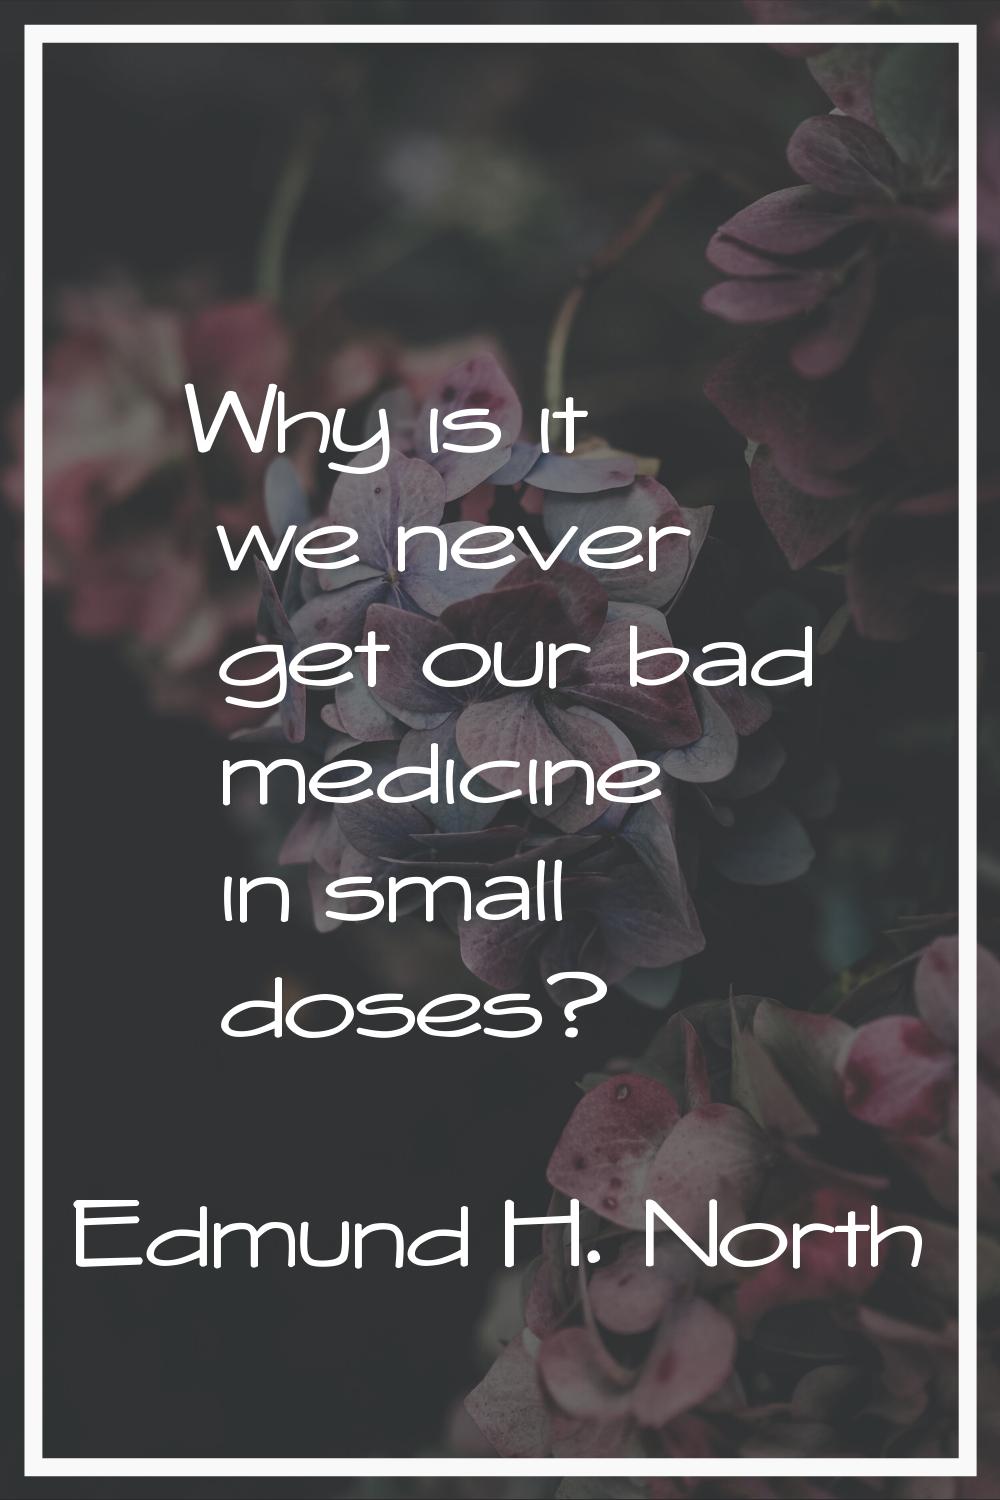 Why is it we never get our bad medicine in small doses?